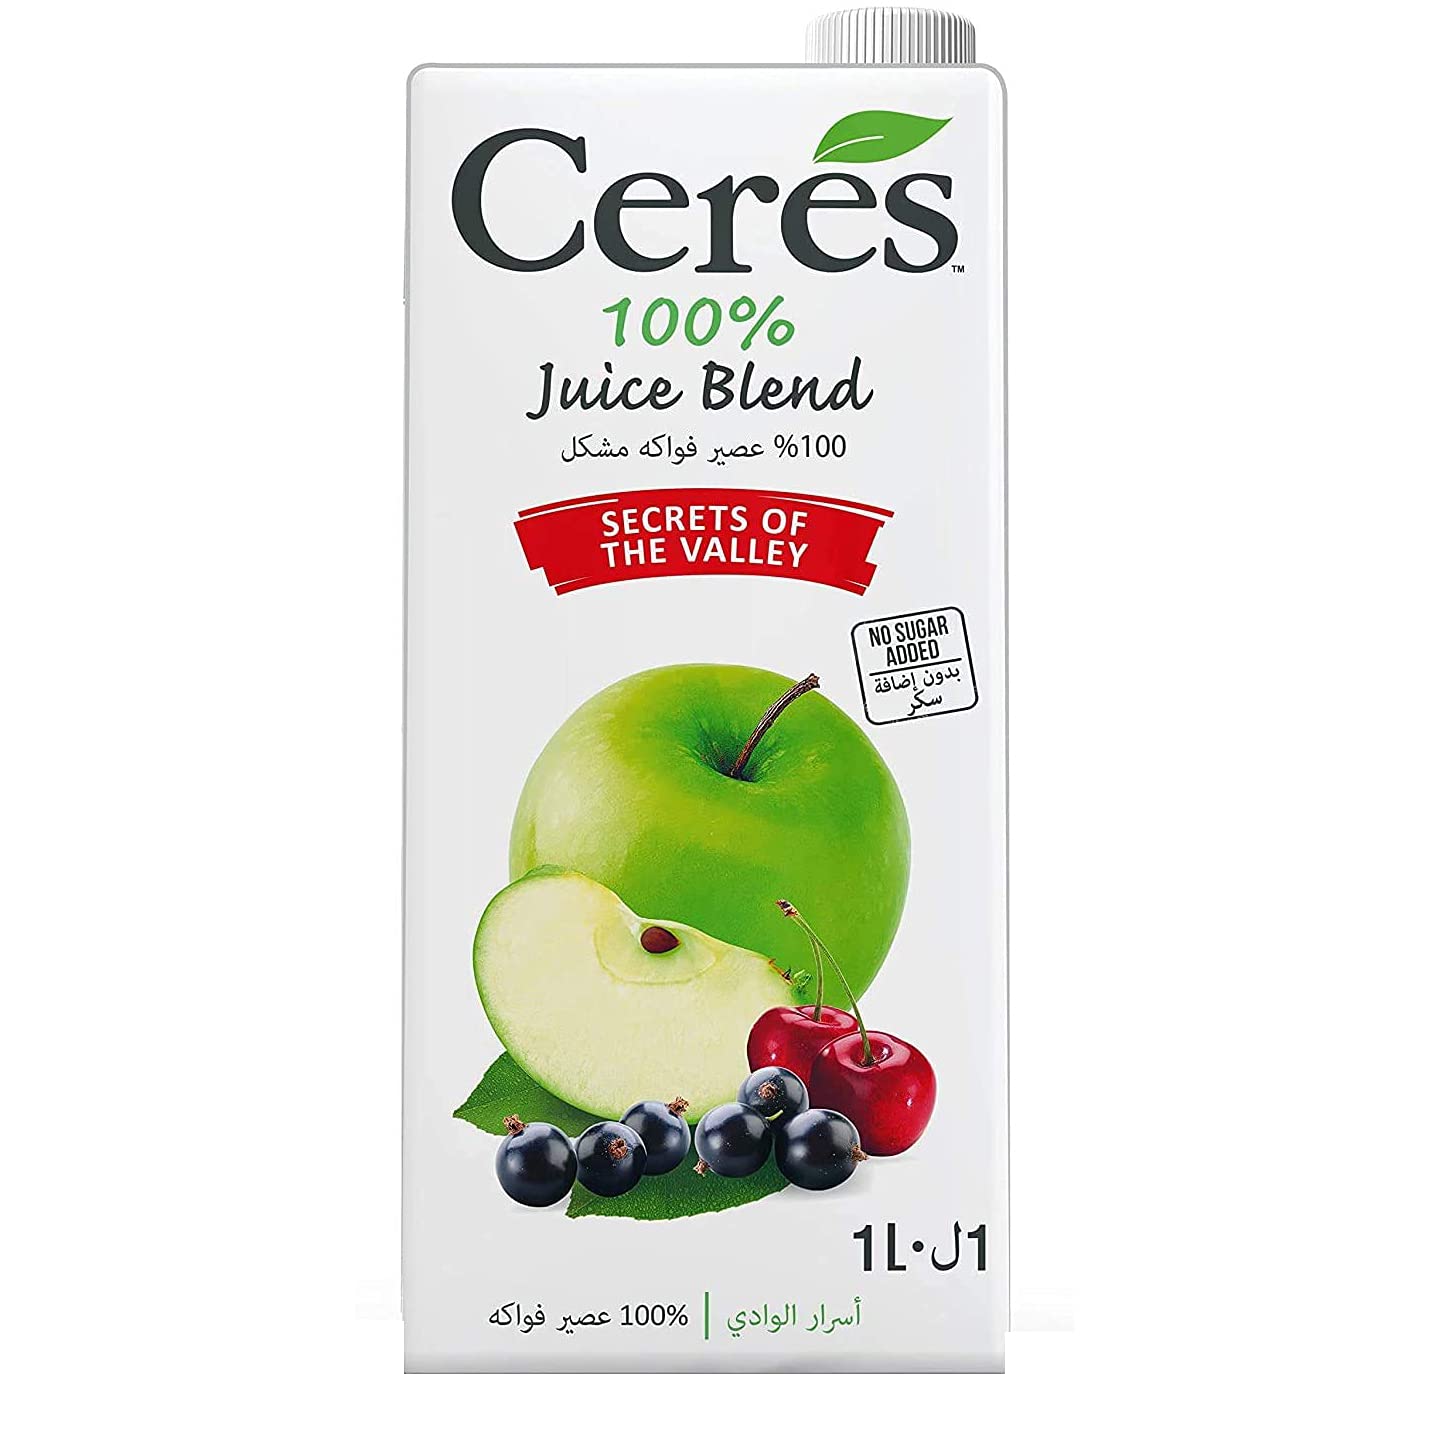 1 kilogram tetra pack of ceres secret of the valley